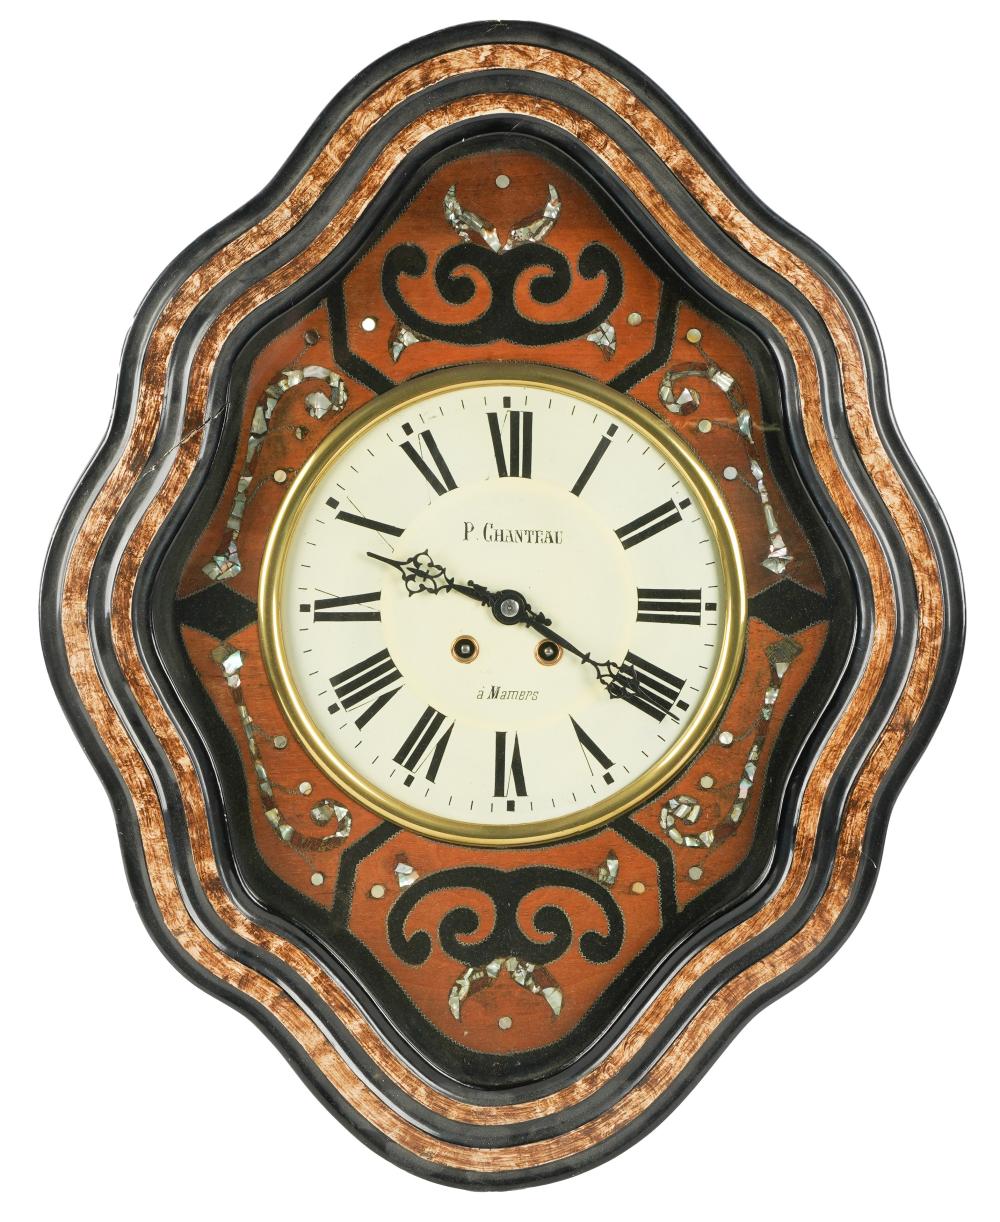 INLAID FRENCH WALL CLOCKwith some